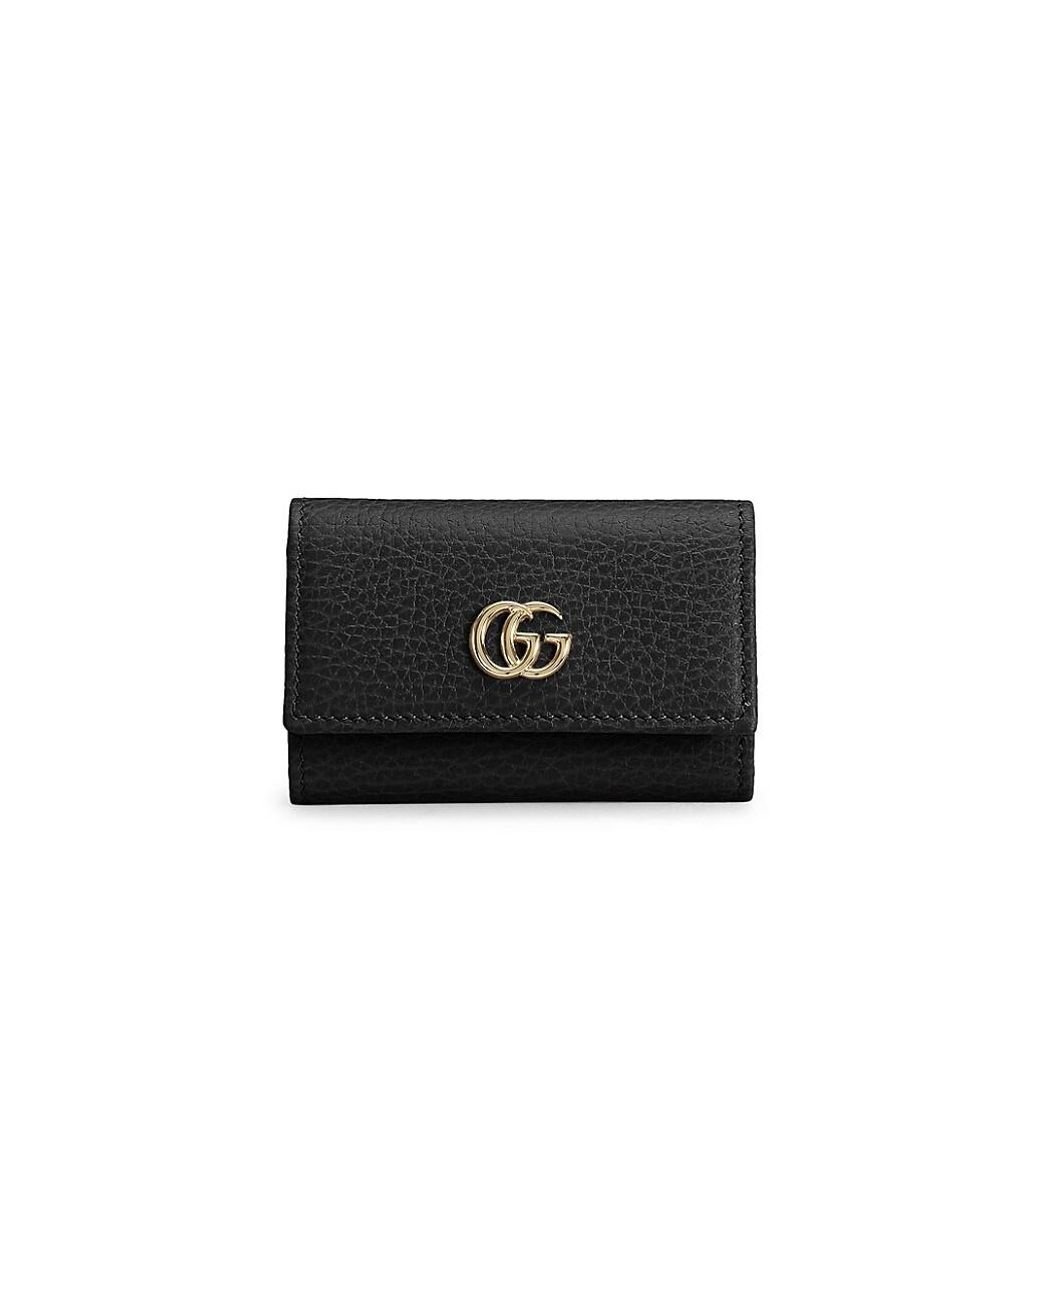 NEW Gucci Marmont GG Key Chain Case Wallet